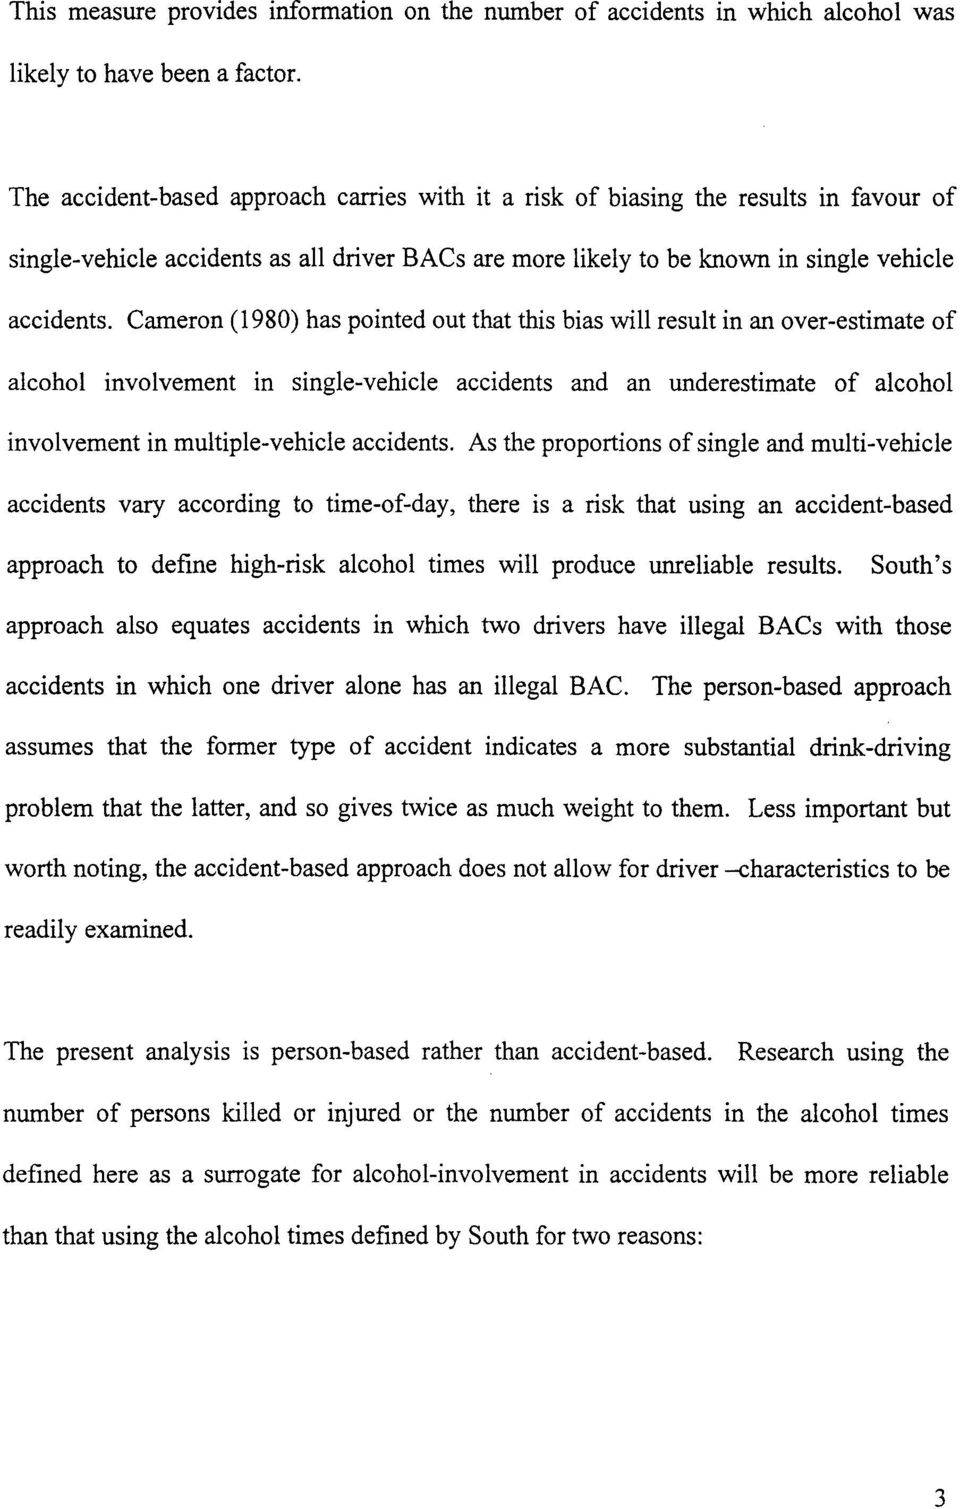 Cameron (1980) has pointed out that this bias will result in an over-estimate of alcohol involvement in single-vehicle accidents and an underestimate of alcohol involvement in multiple-vehicle